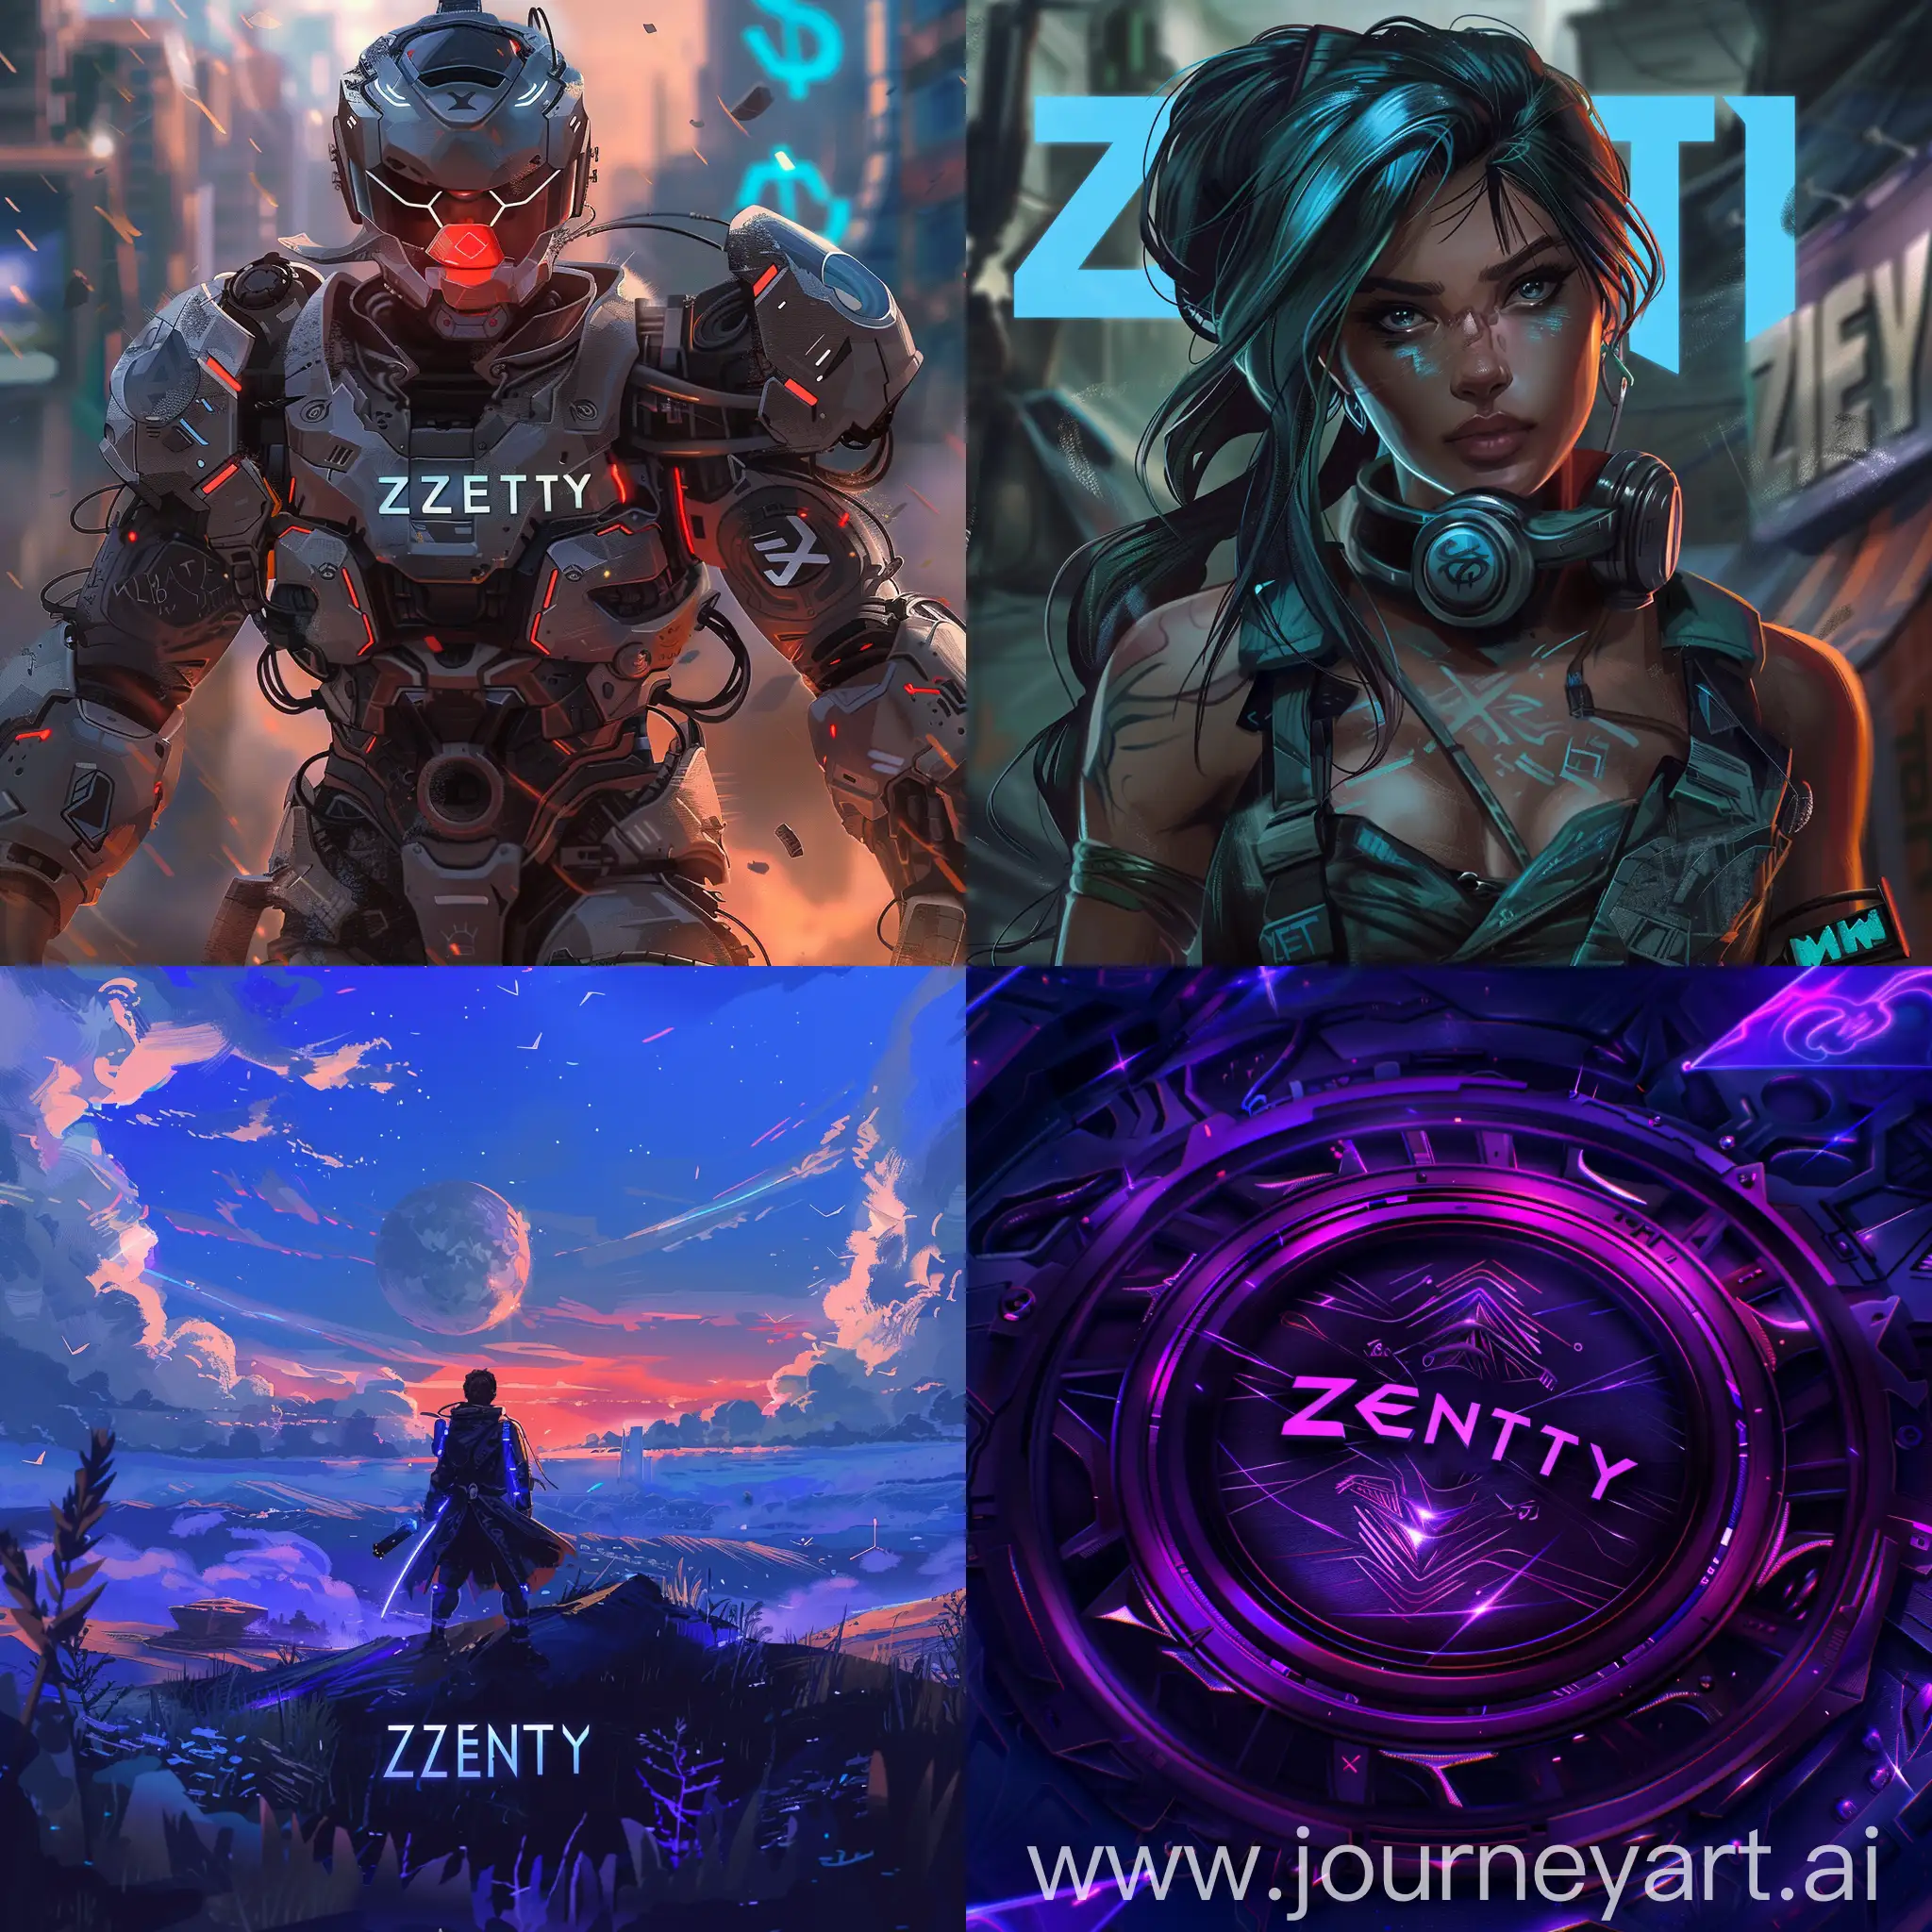 zentry is a gaming platform, make an art for it and write $ZENT on the art, detailed, hd